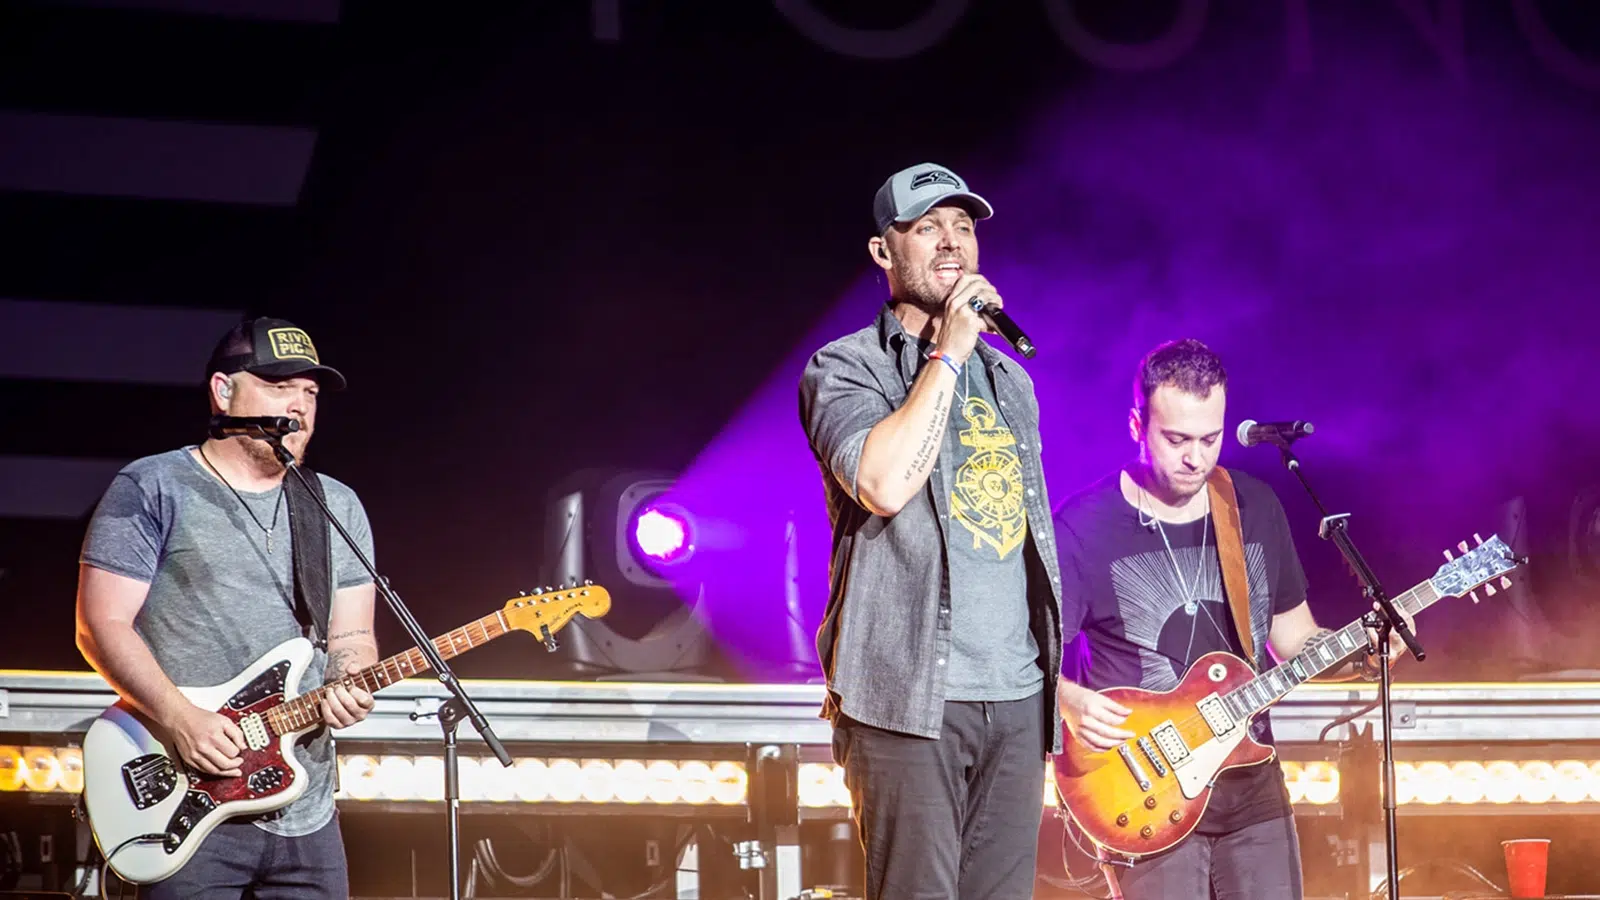 brett young with band country fair concert photography southern by Southern Exposure Media Group